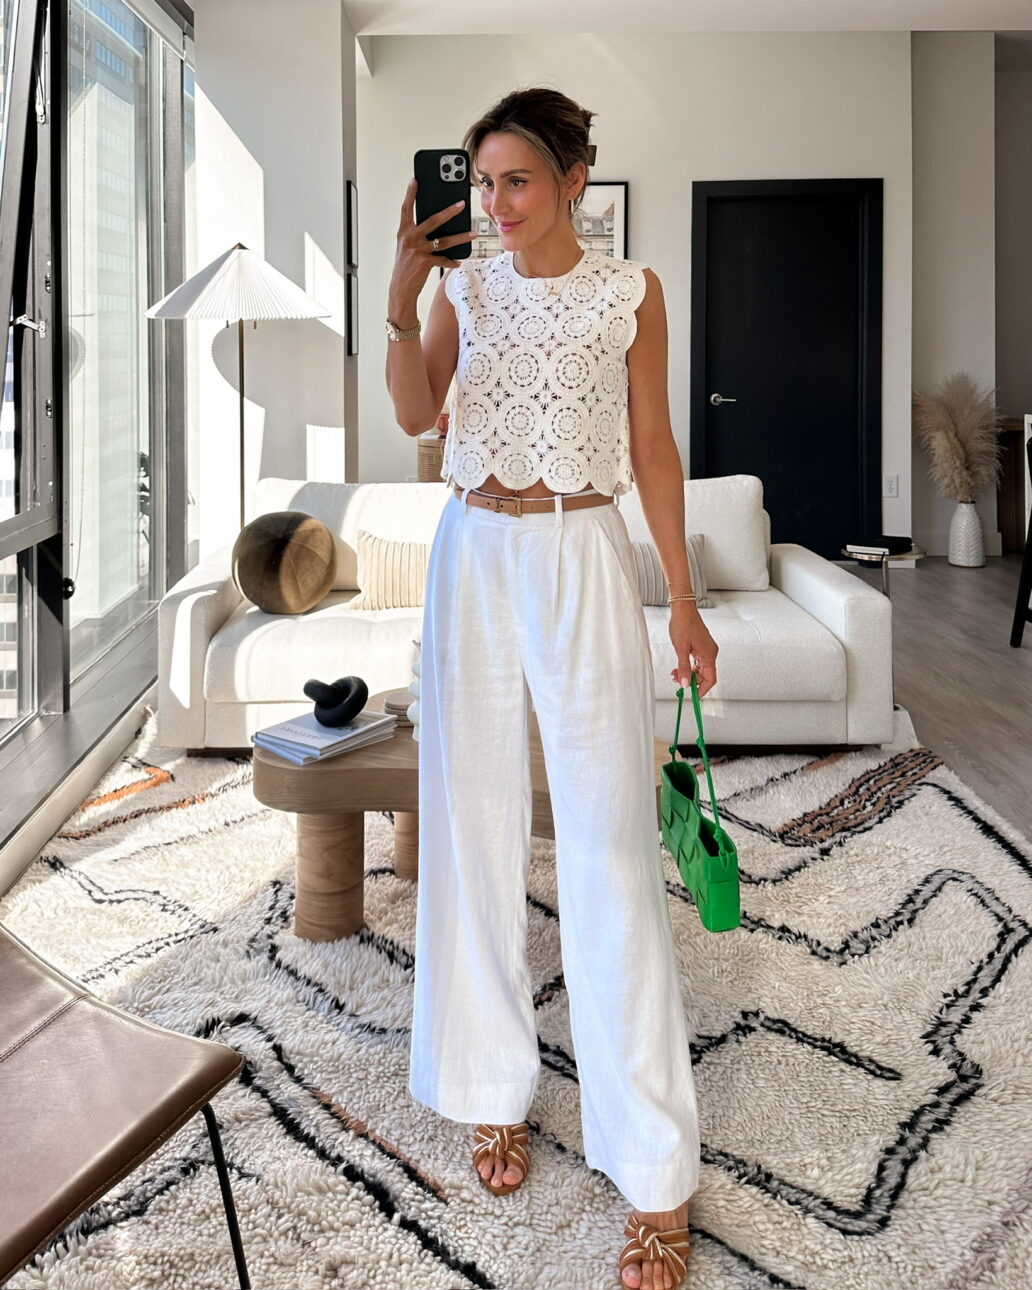 trouser outfit idea with a belt, white tank top and heels